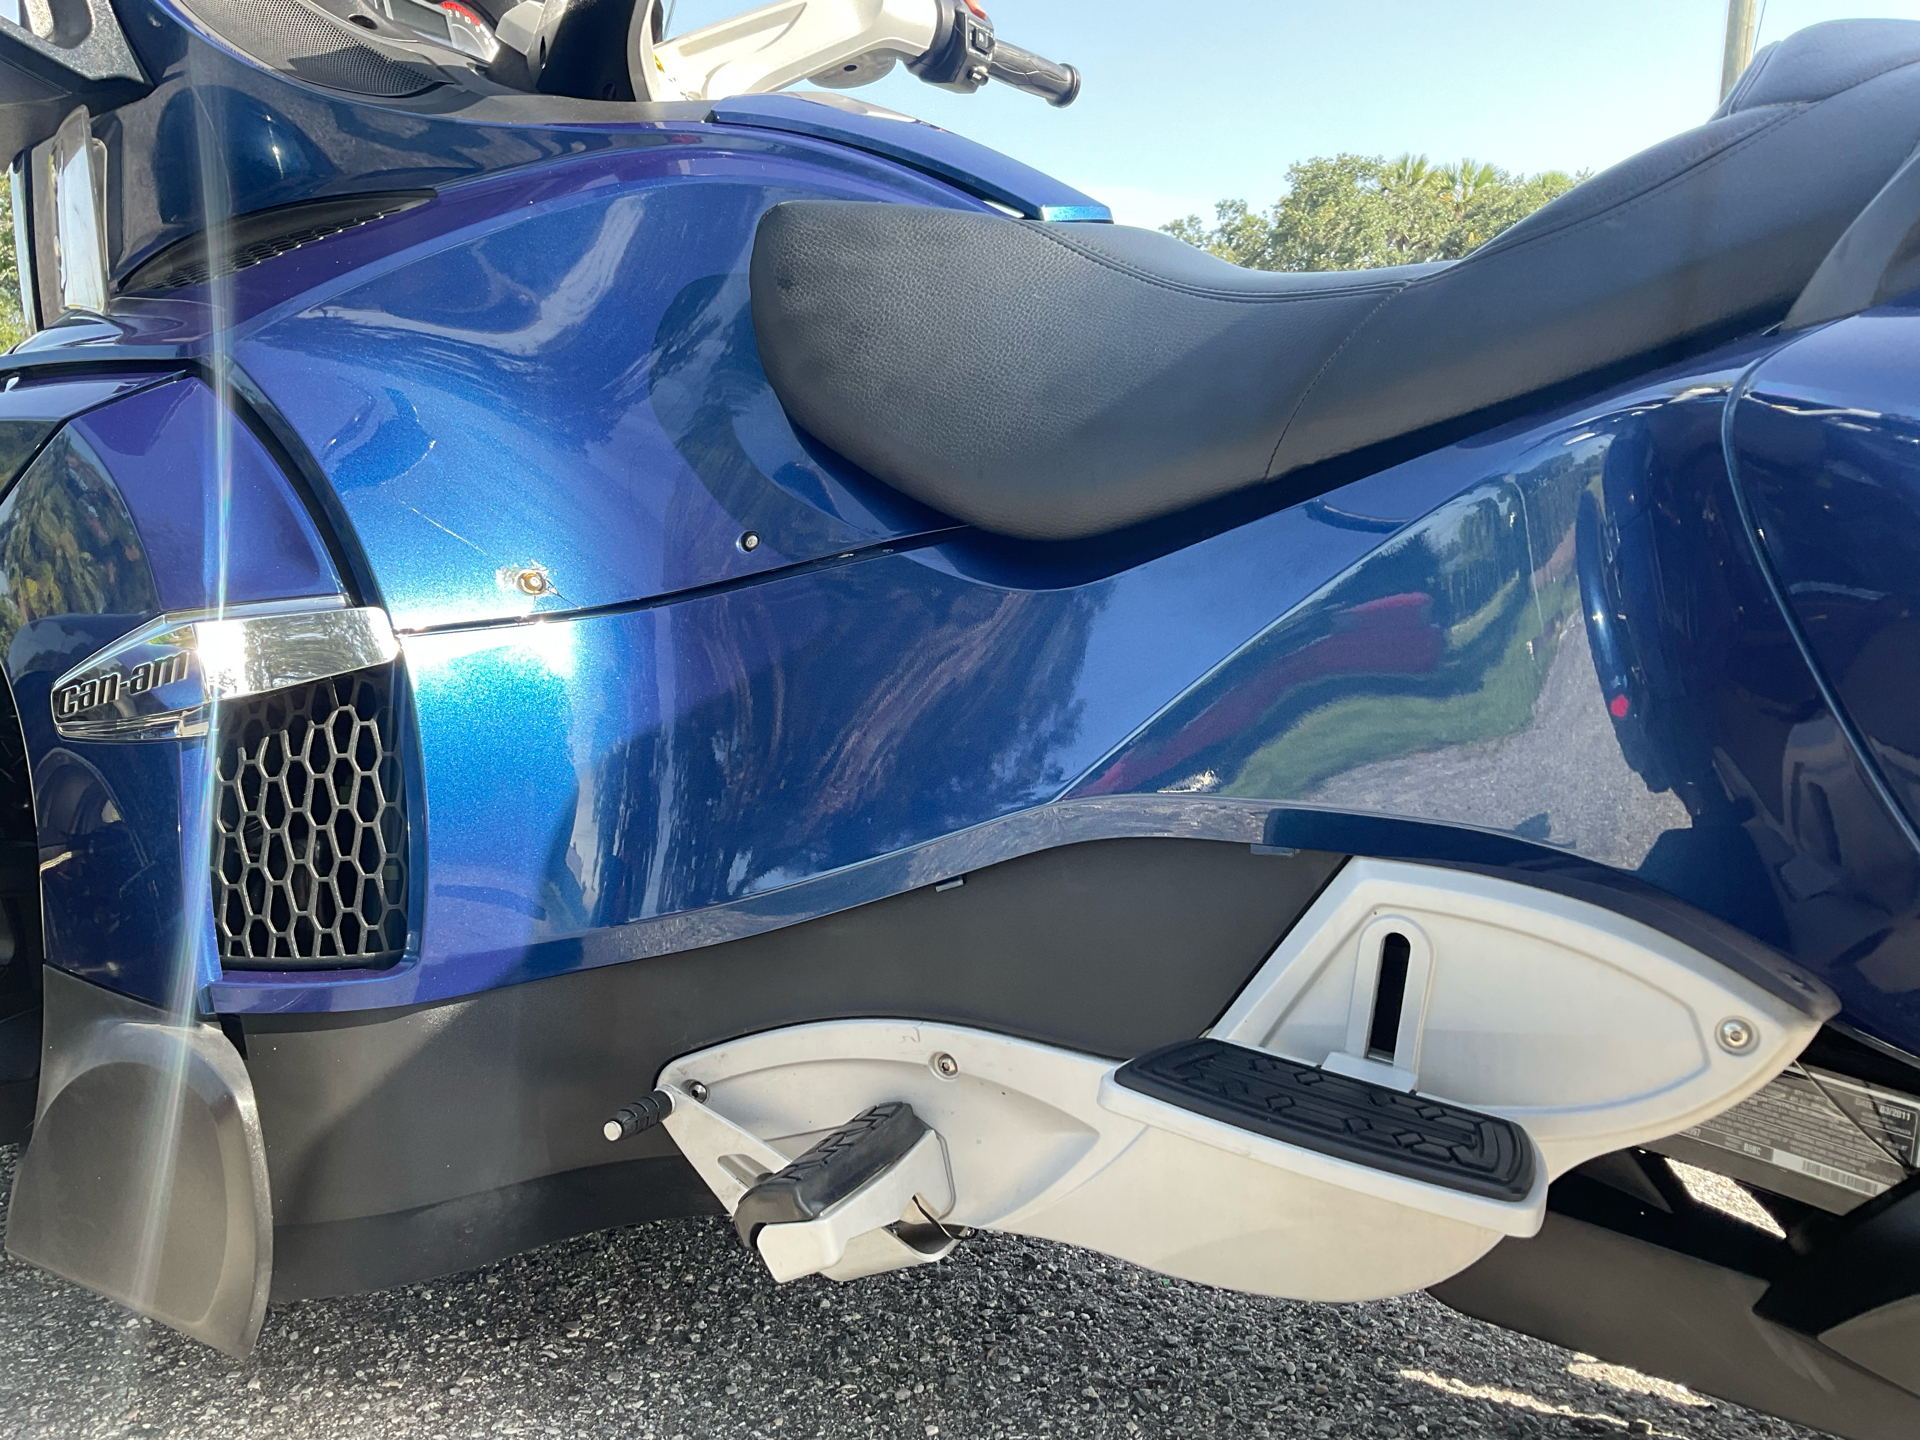 2011 Can-Am Spyder® RT-S SM5 in Sanford, Florida - Photo 20